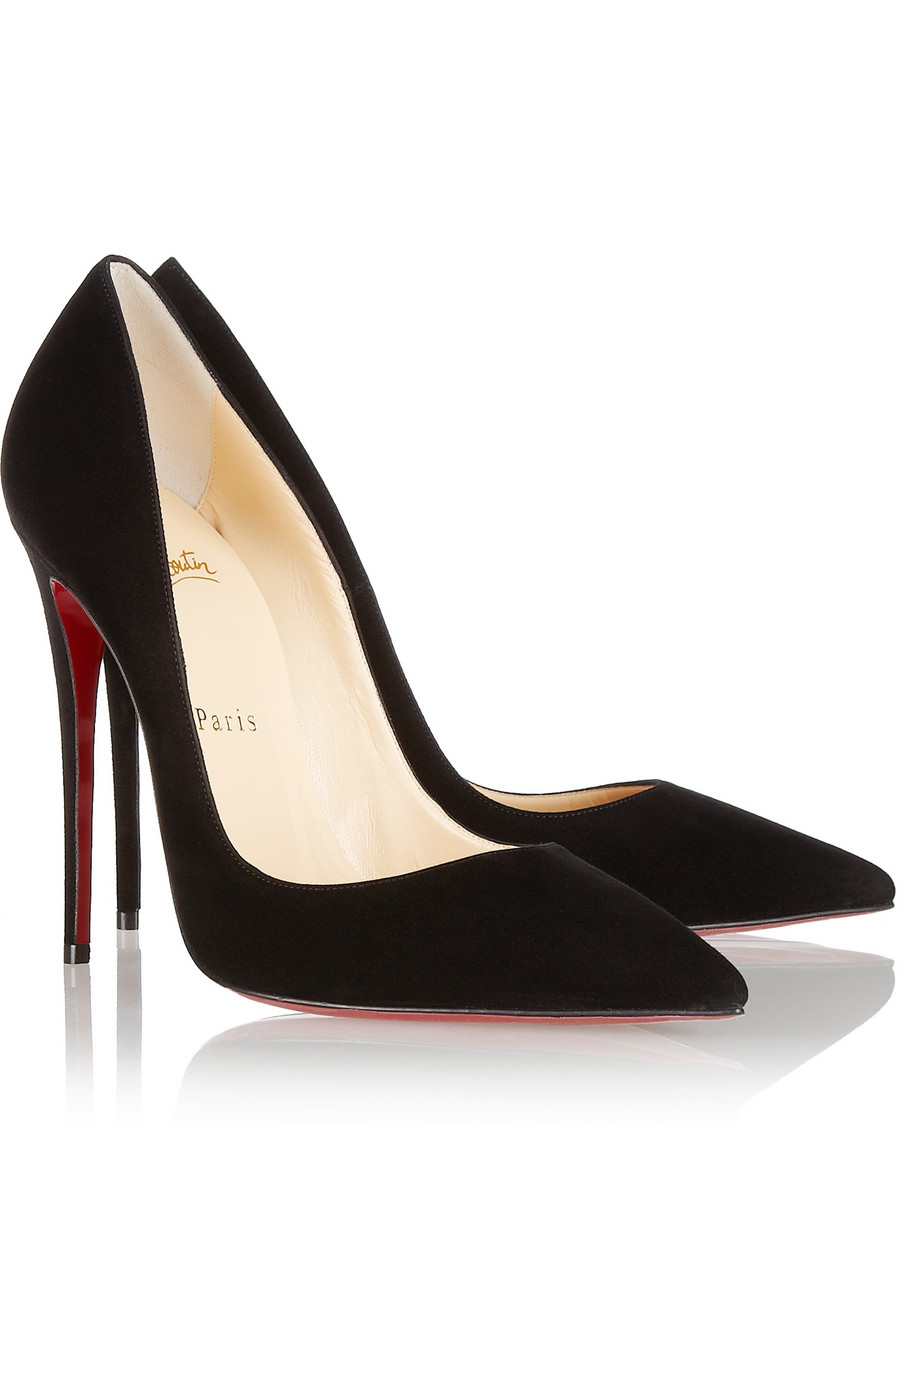 Christian louboutin So Kate 120 Suede Pumps in Black | Lyst